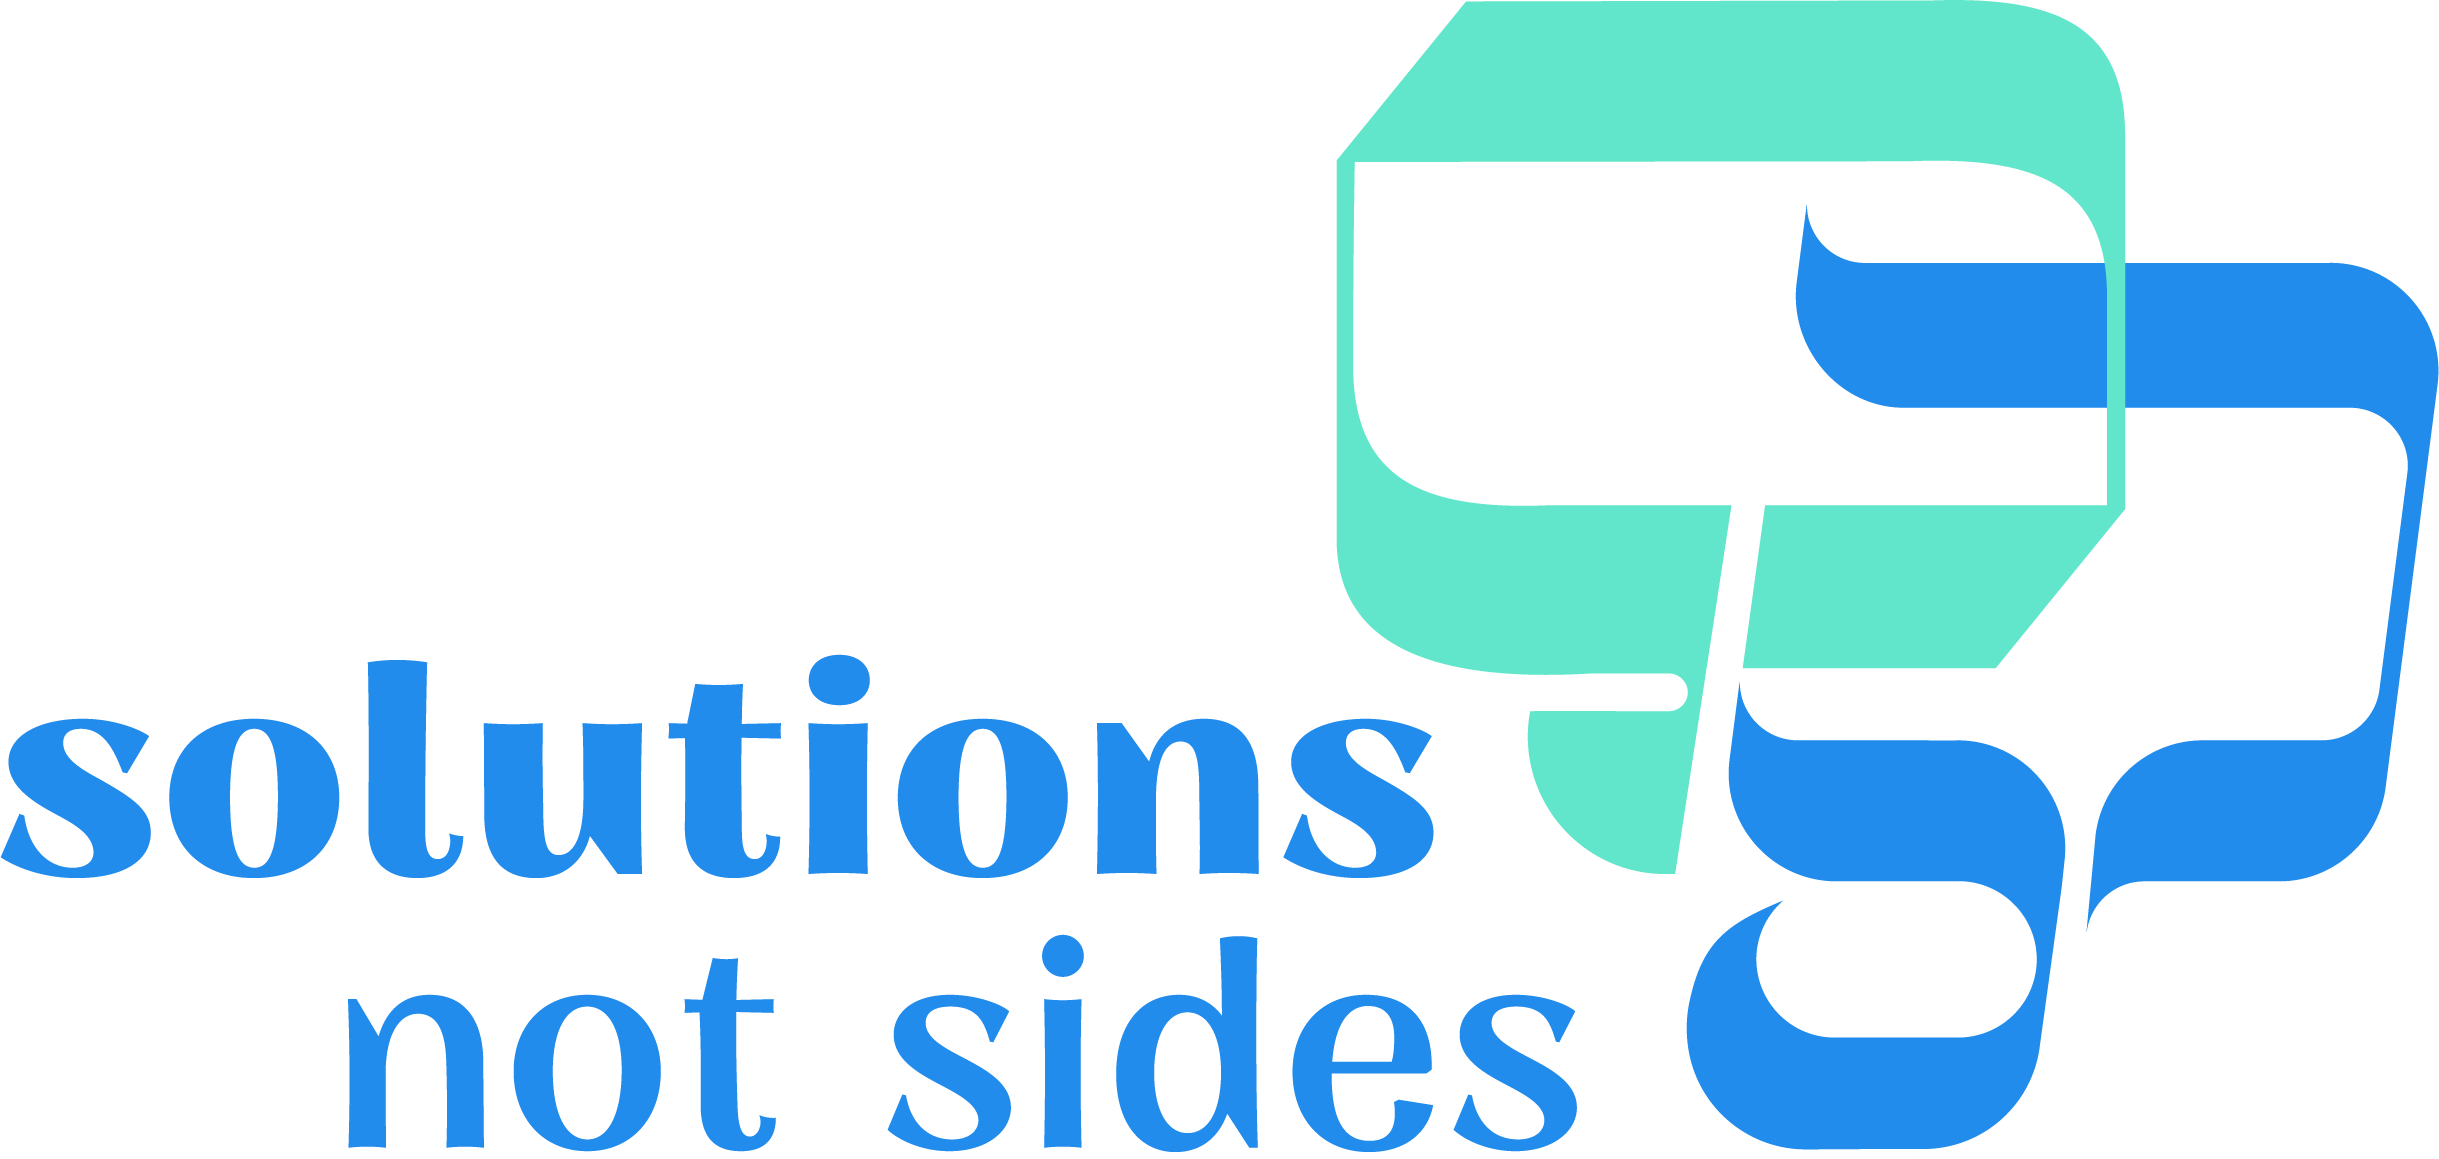 Solutions not sides logo